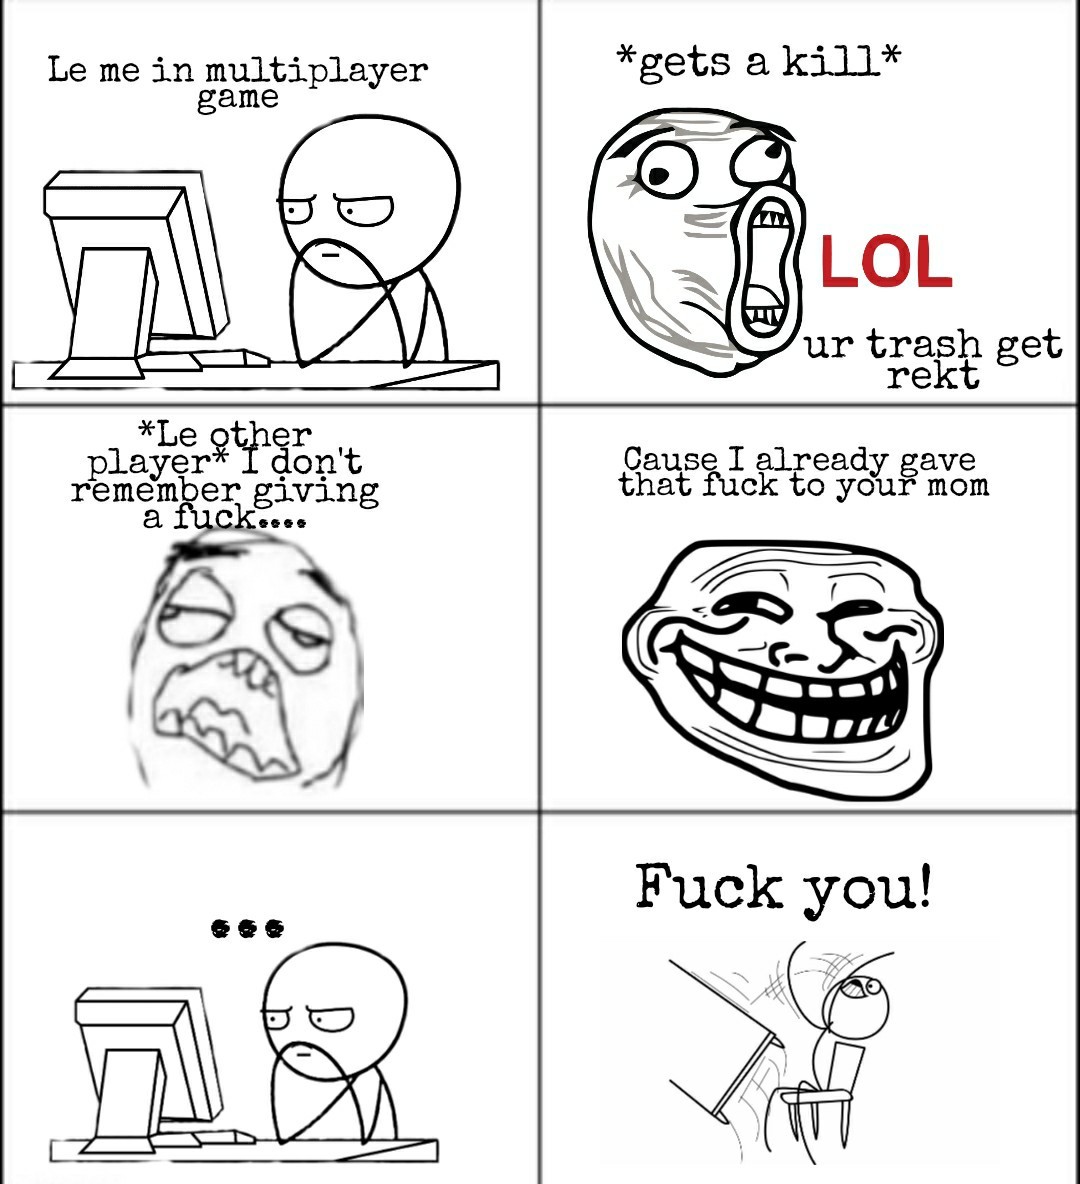 My attempt at an original rage comic. Took me about three hours to edit - meme